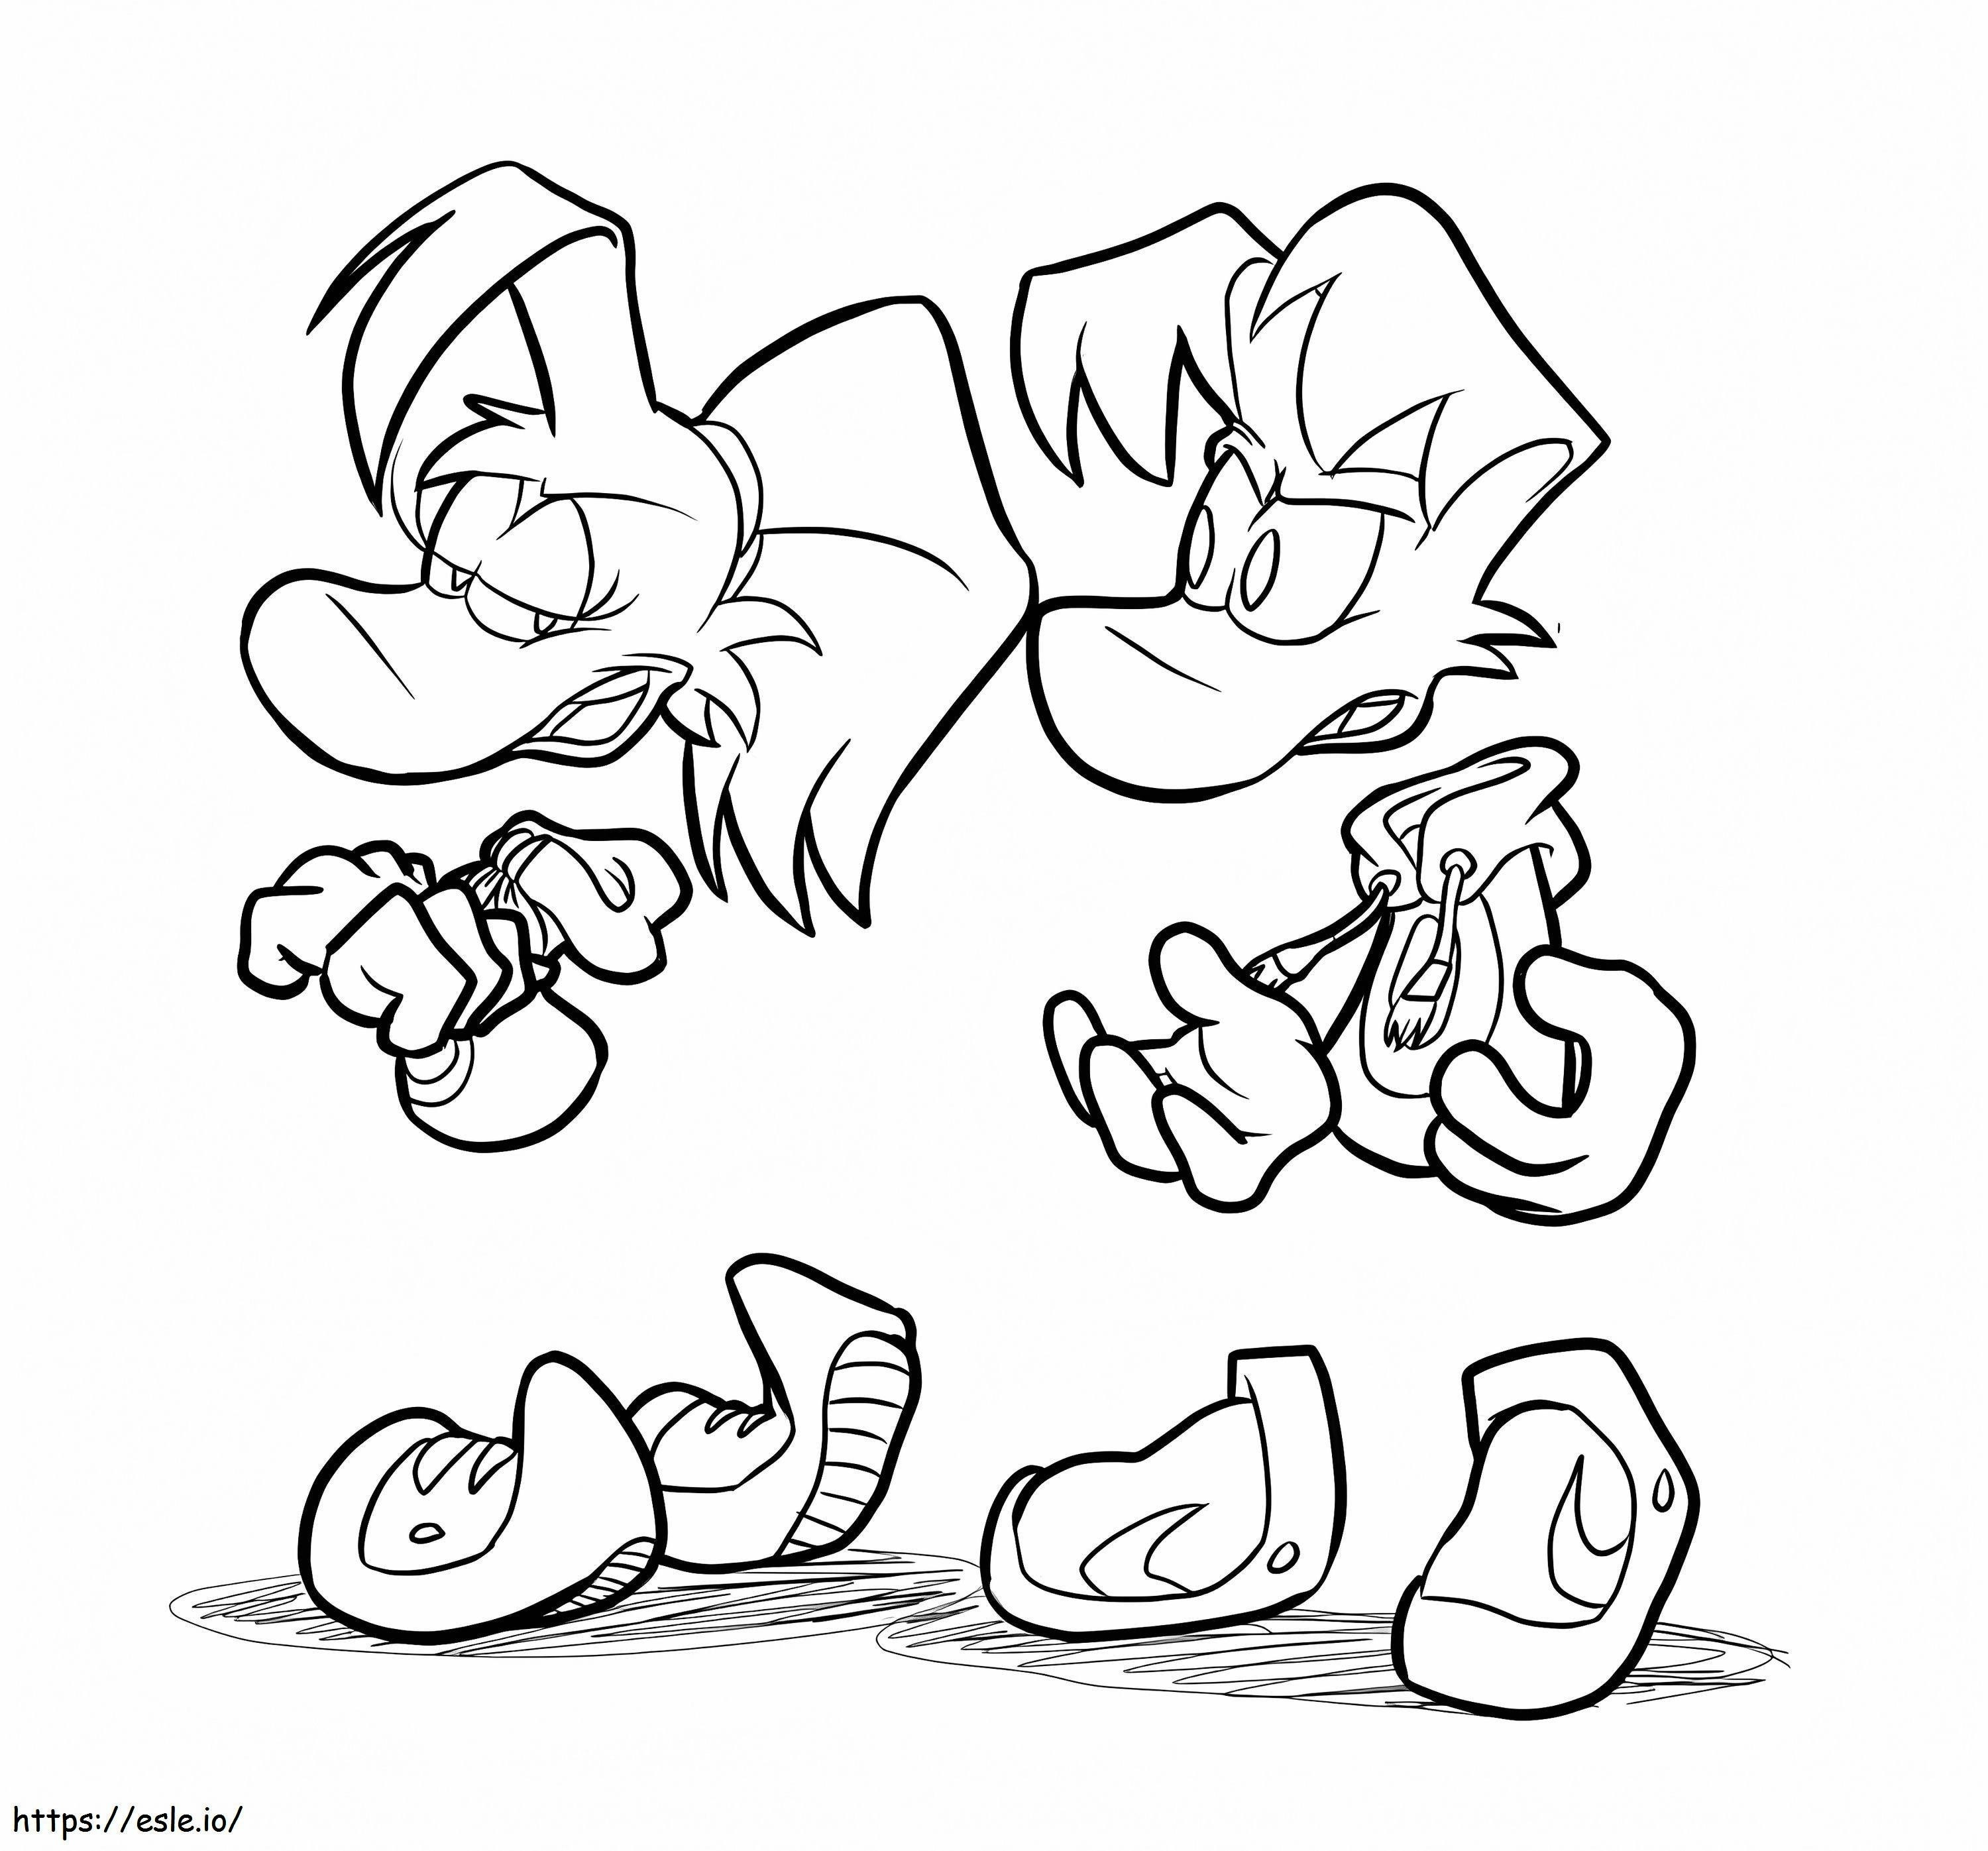 Rayman 5 coloring page